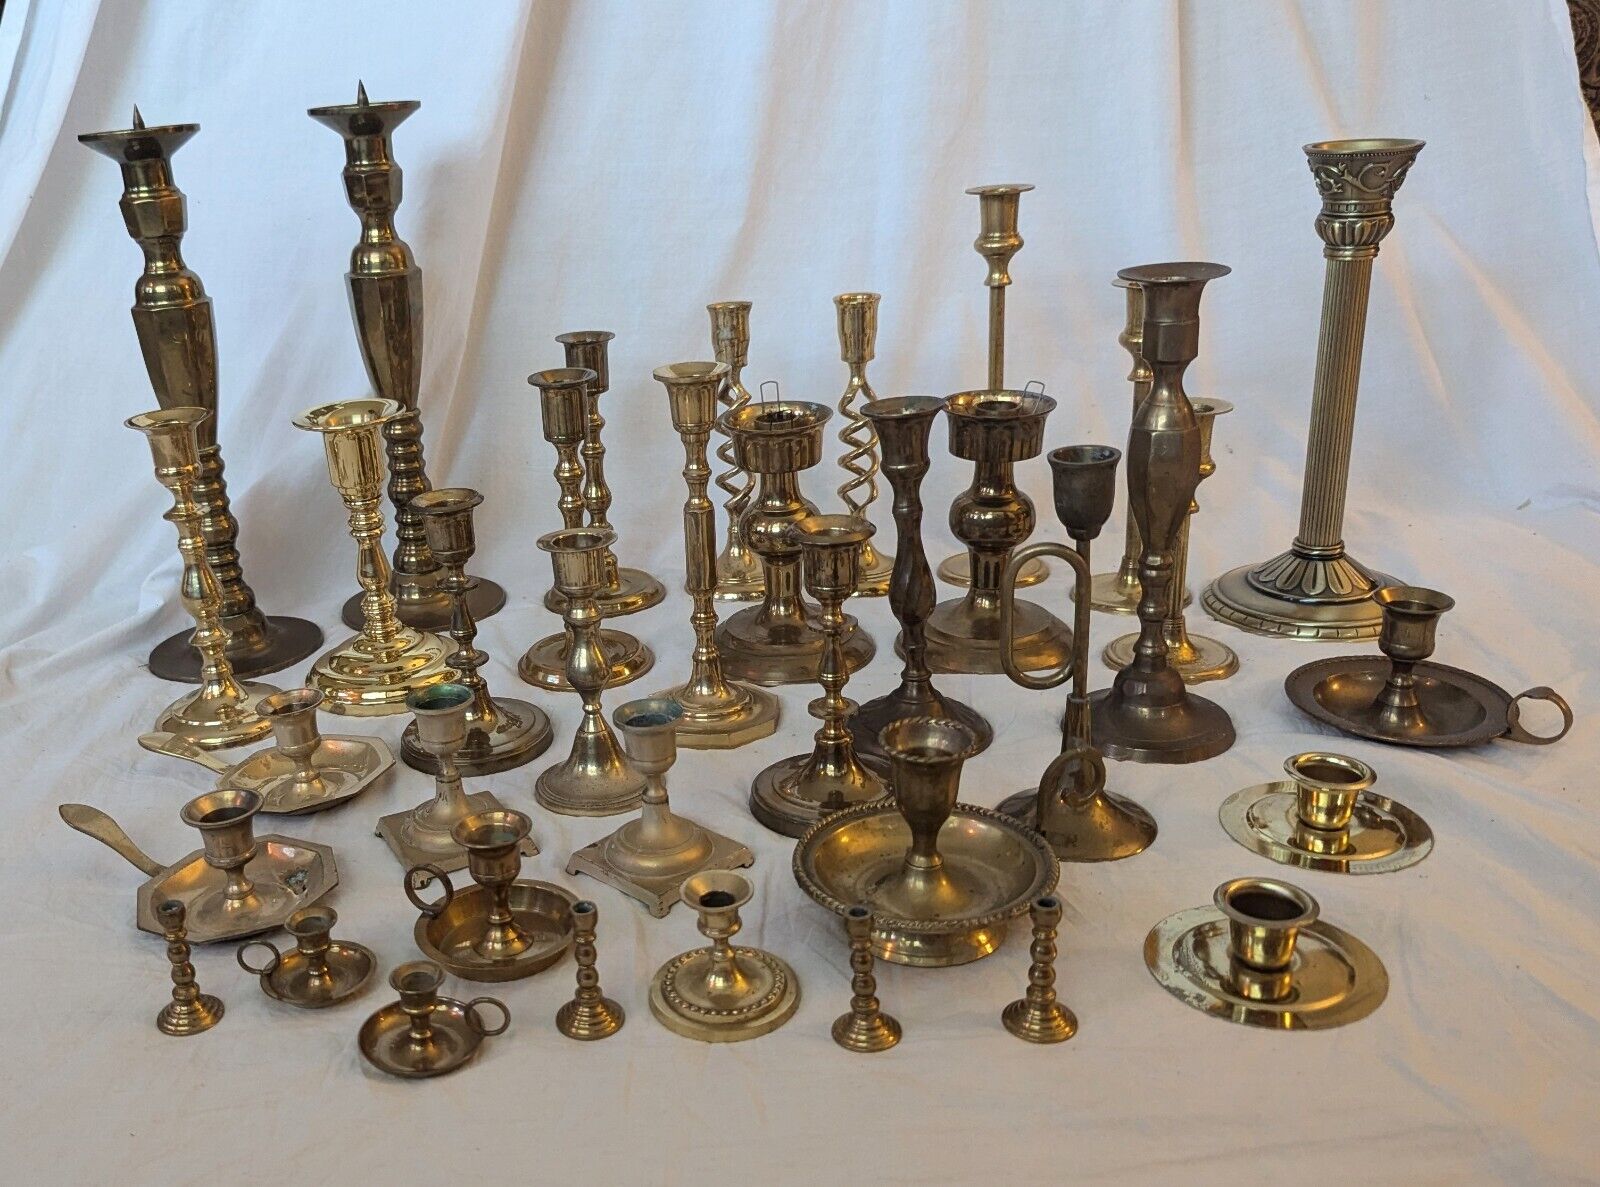 37 Brass Candle Holders Wedding Party Table Decor Patina Wax 19 Pounds Lot Vtg